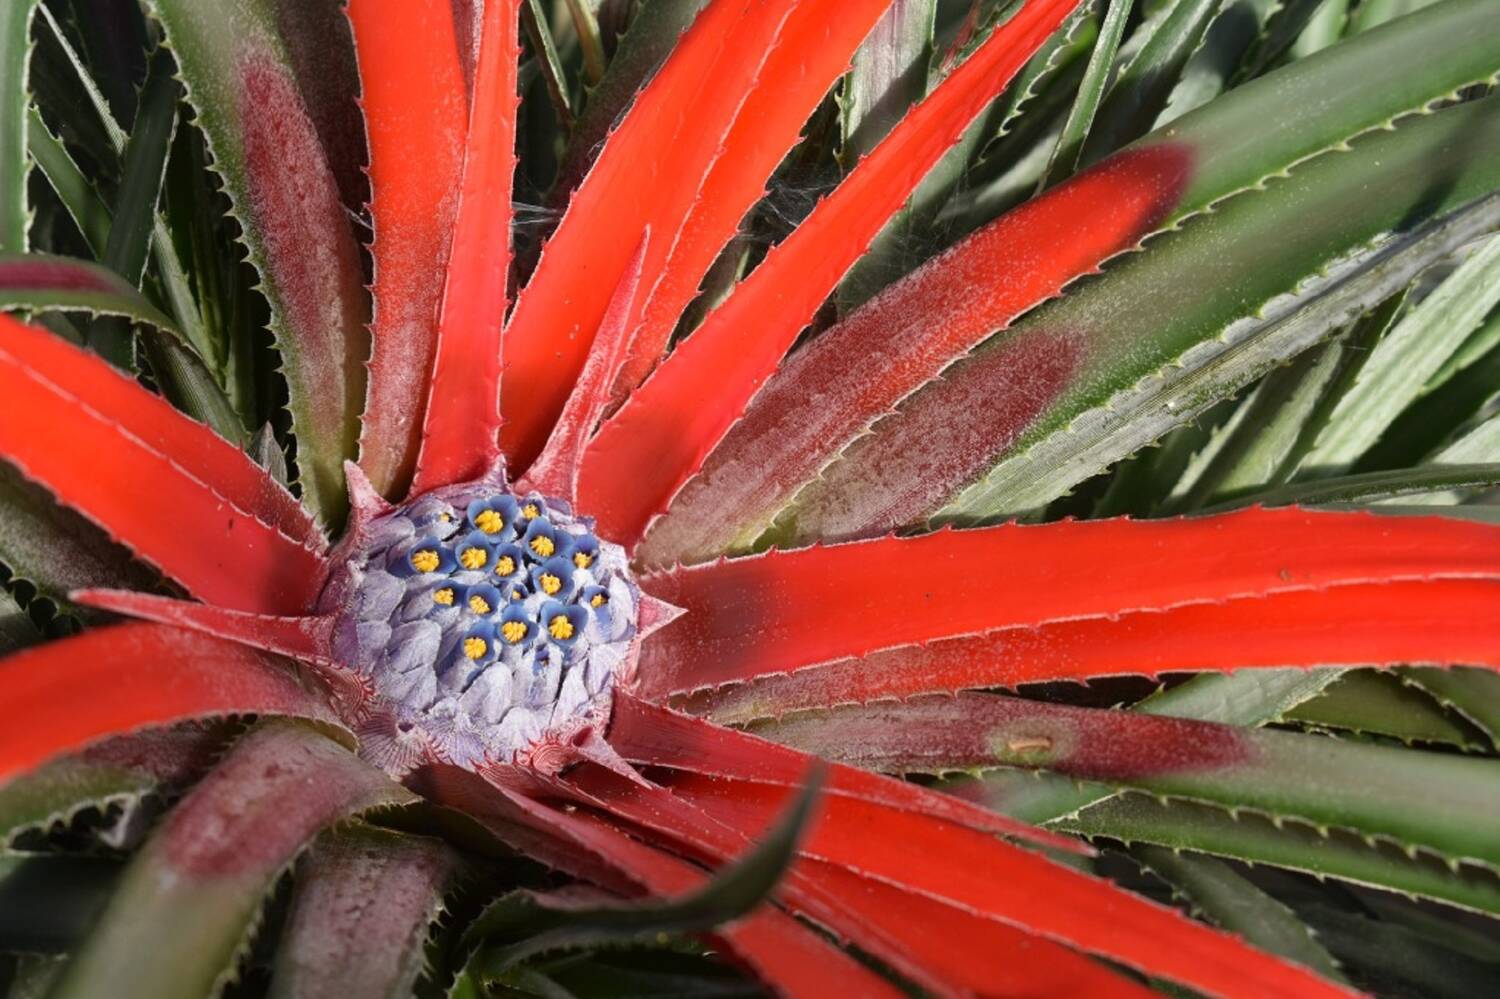 A close-up view of a Fascicularia plant, which has a tiny blue bud-shaped flower at the centre, surrounded by spiky red petals or leaves. Those red spikes are surrounded by darker green leaves.